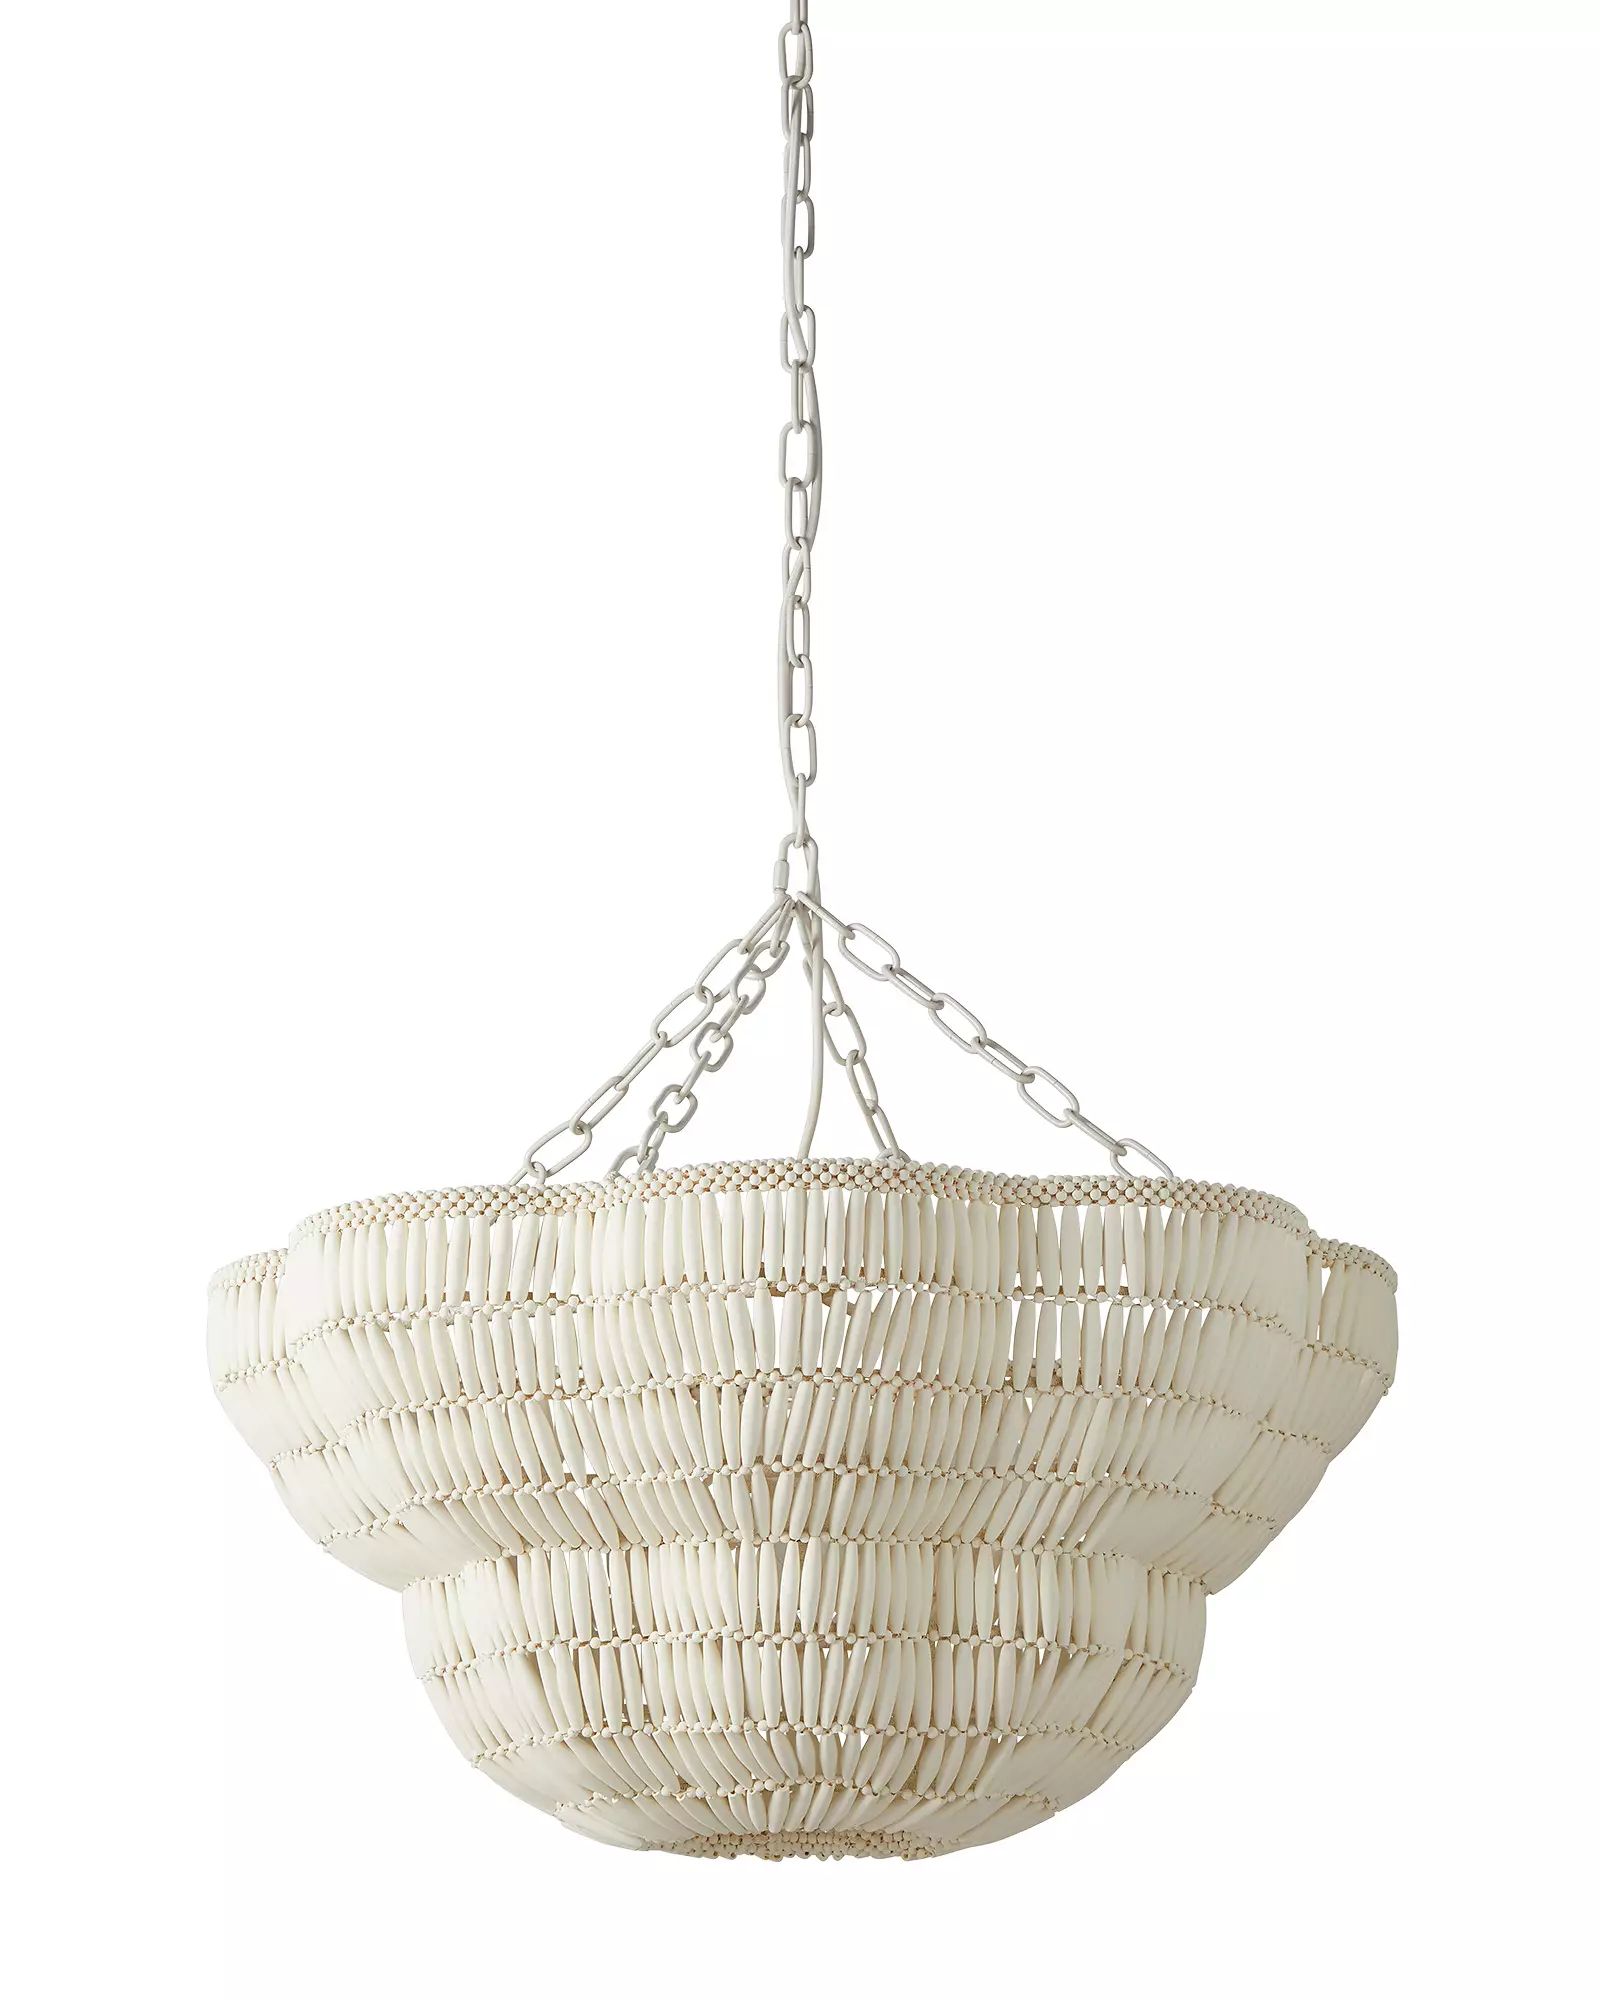 Savannah Chandelier | Serena and Lily